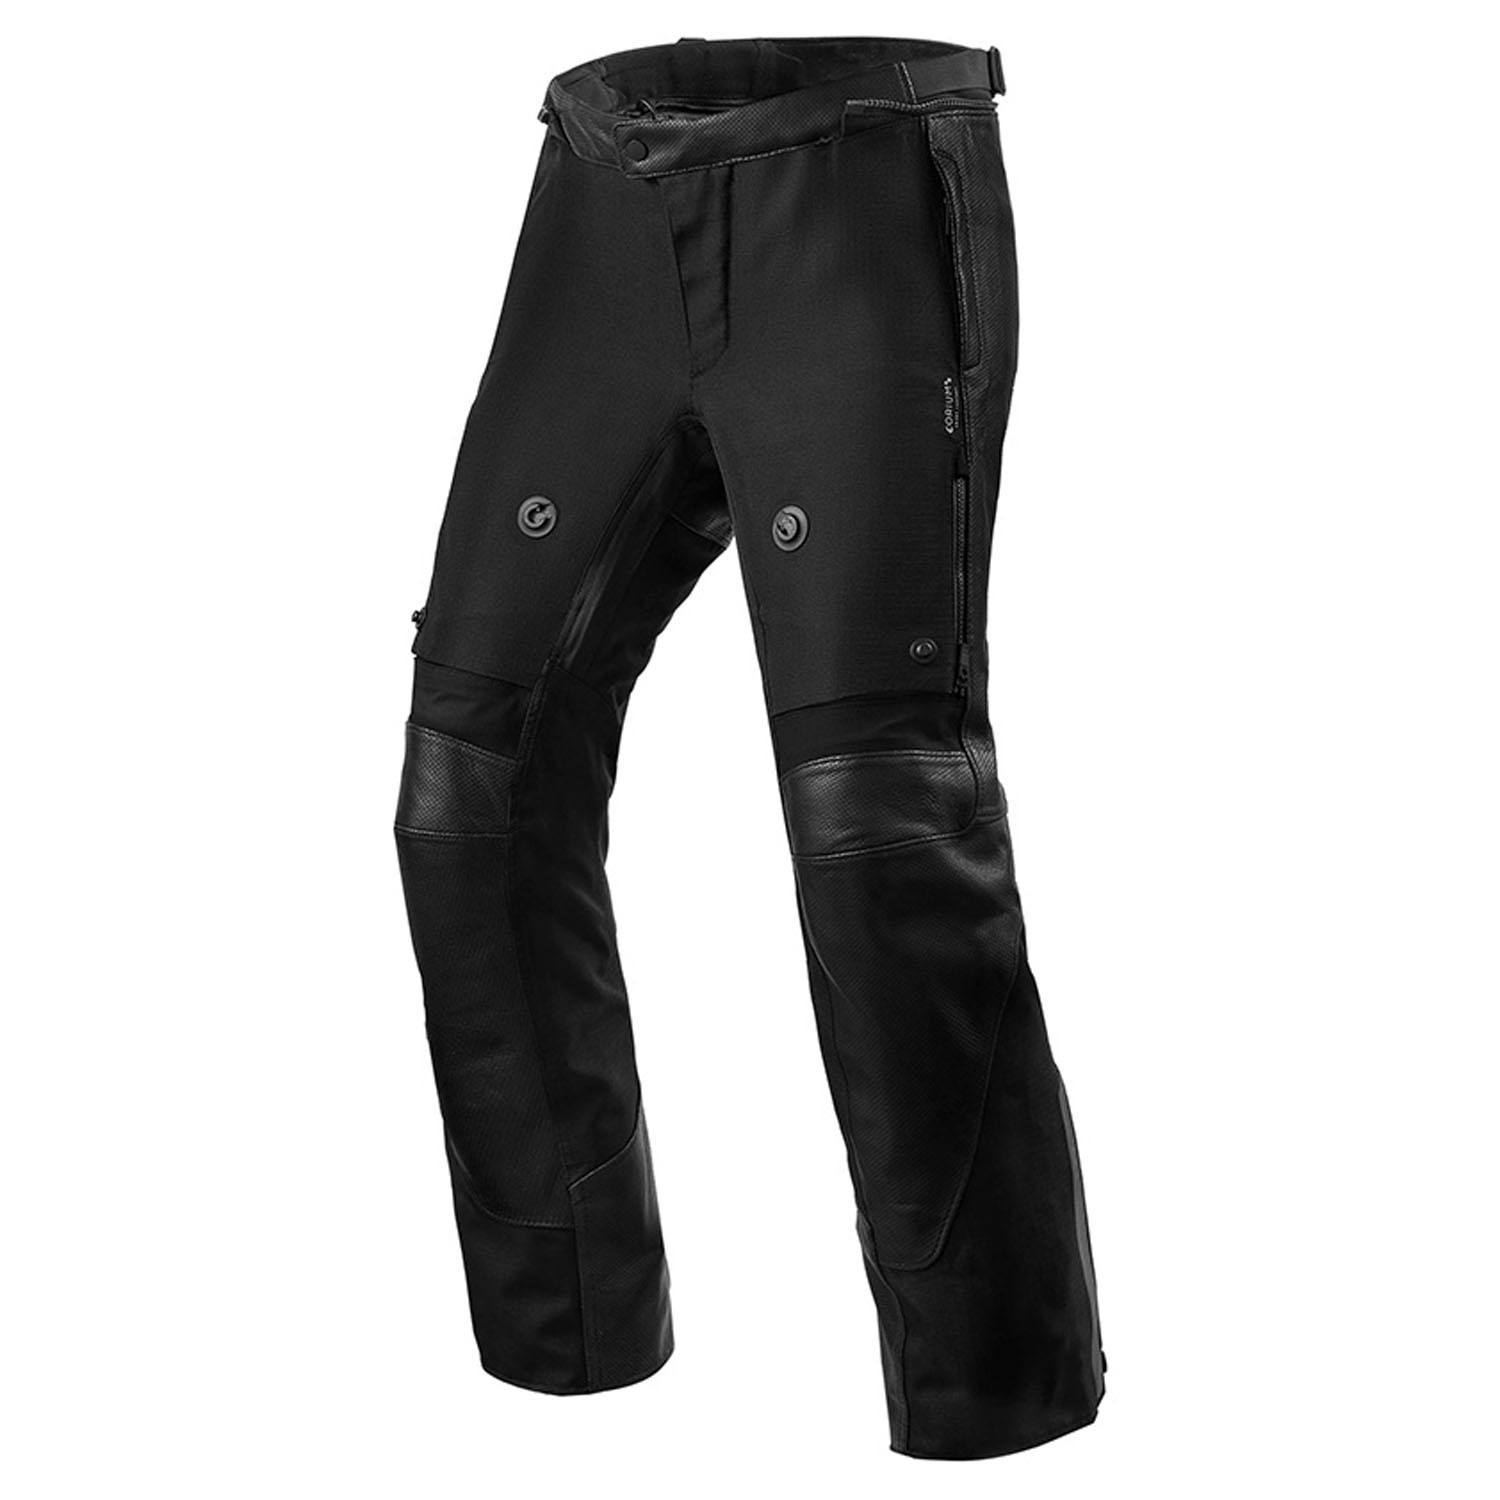 Image of REV'IT! Trousers Valve H2O Black Standard Motorcycle Pants Size 54 ID 8700001315821